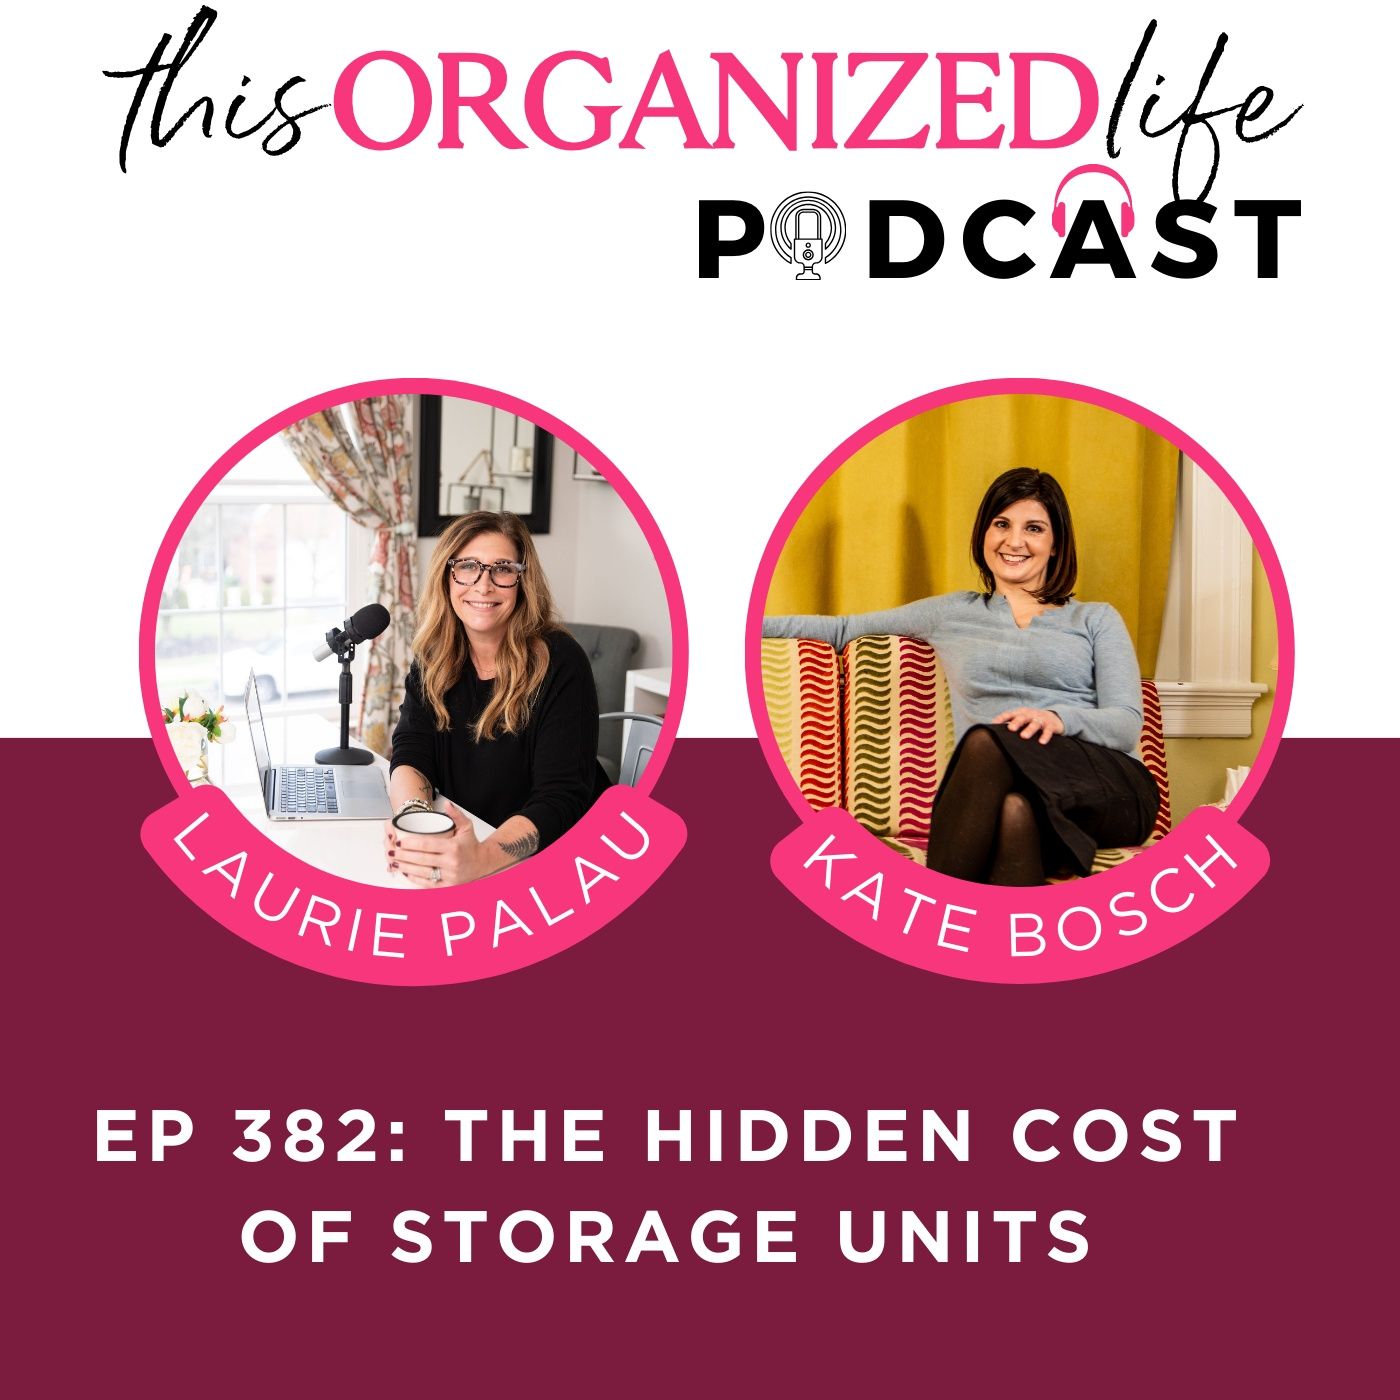 The Hidden Costs of Storage Units with Kate Bosch | Ep 382